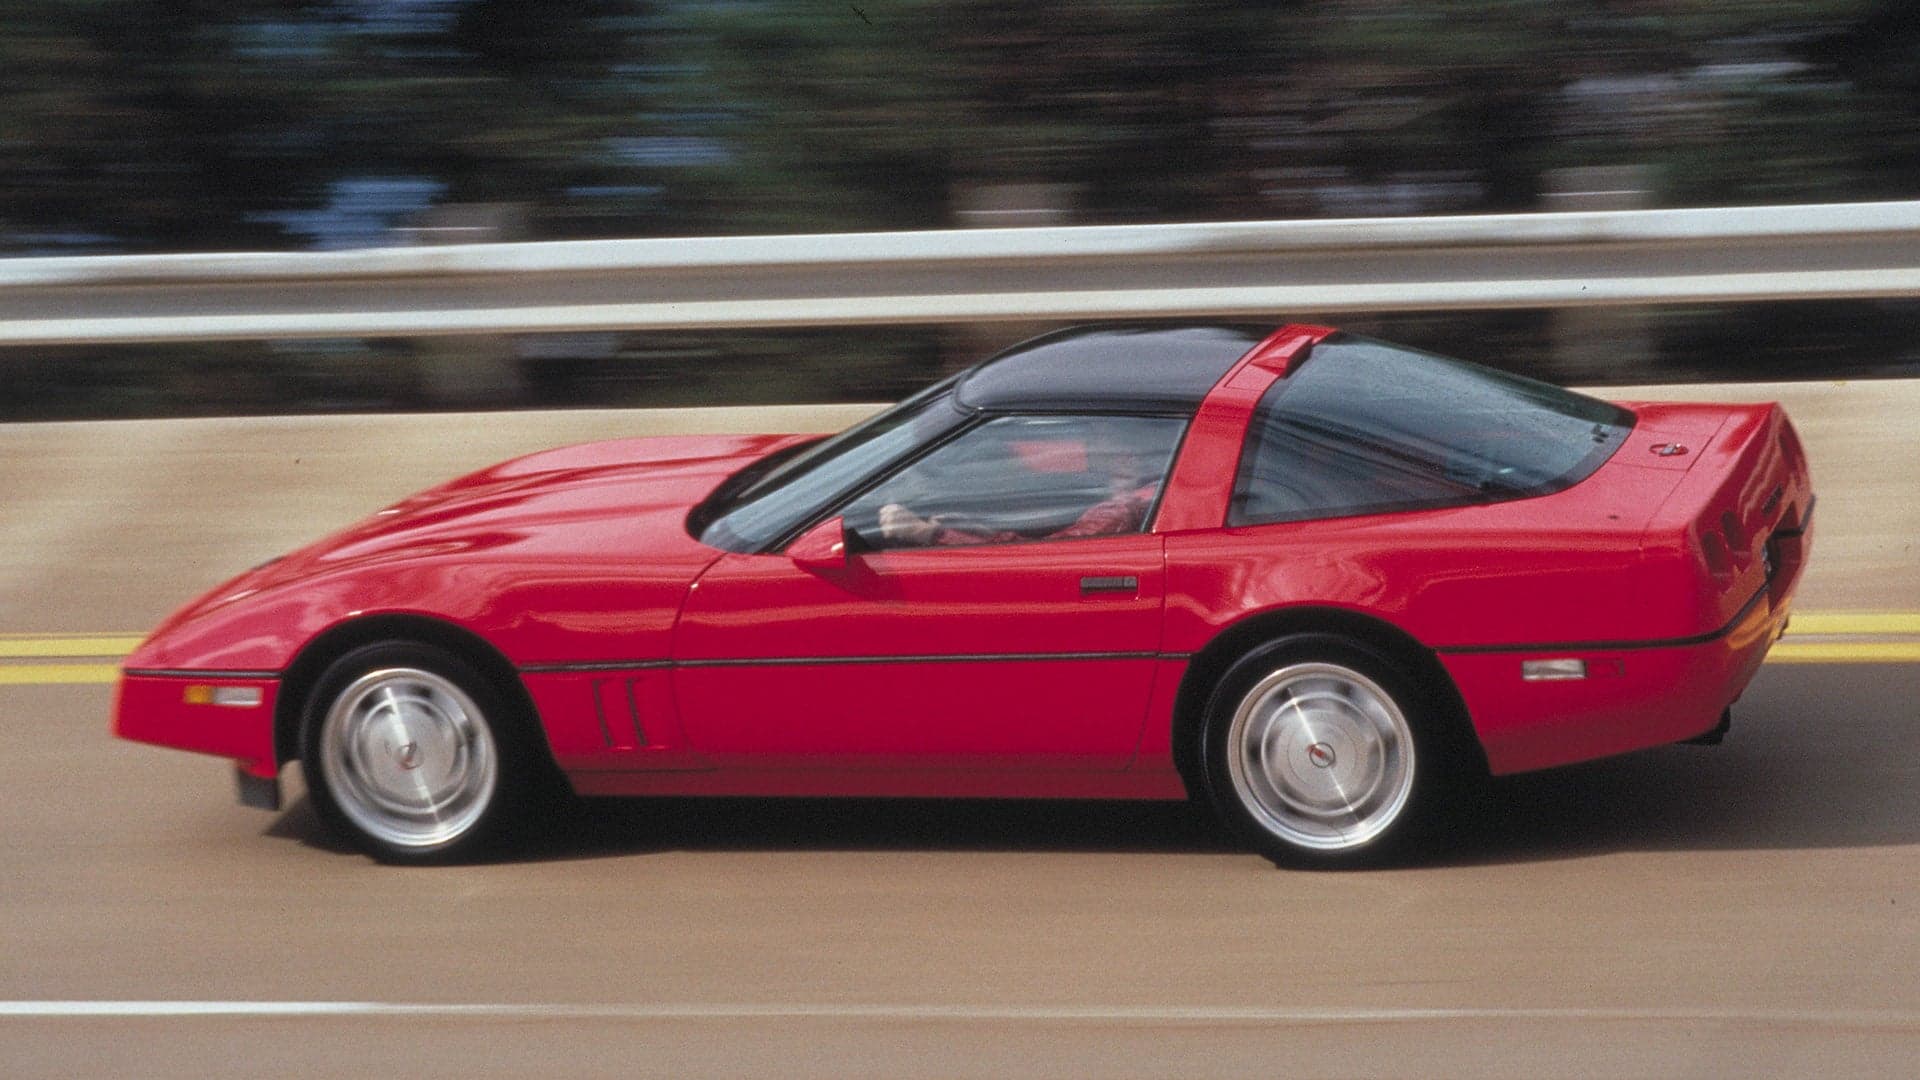 It Took GM Six Years to Fix the Chevy Corvette C4 by Ditching the Doug Nash 4+3 Gearbox